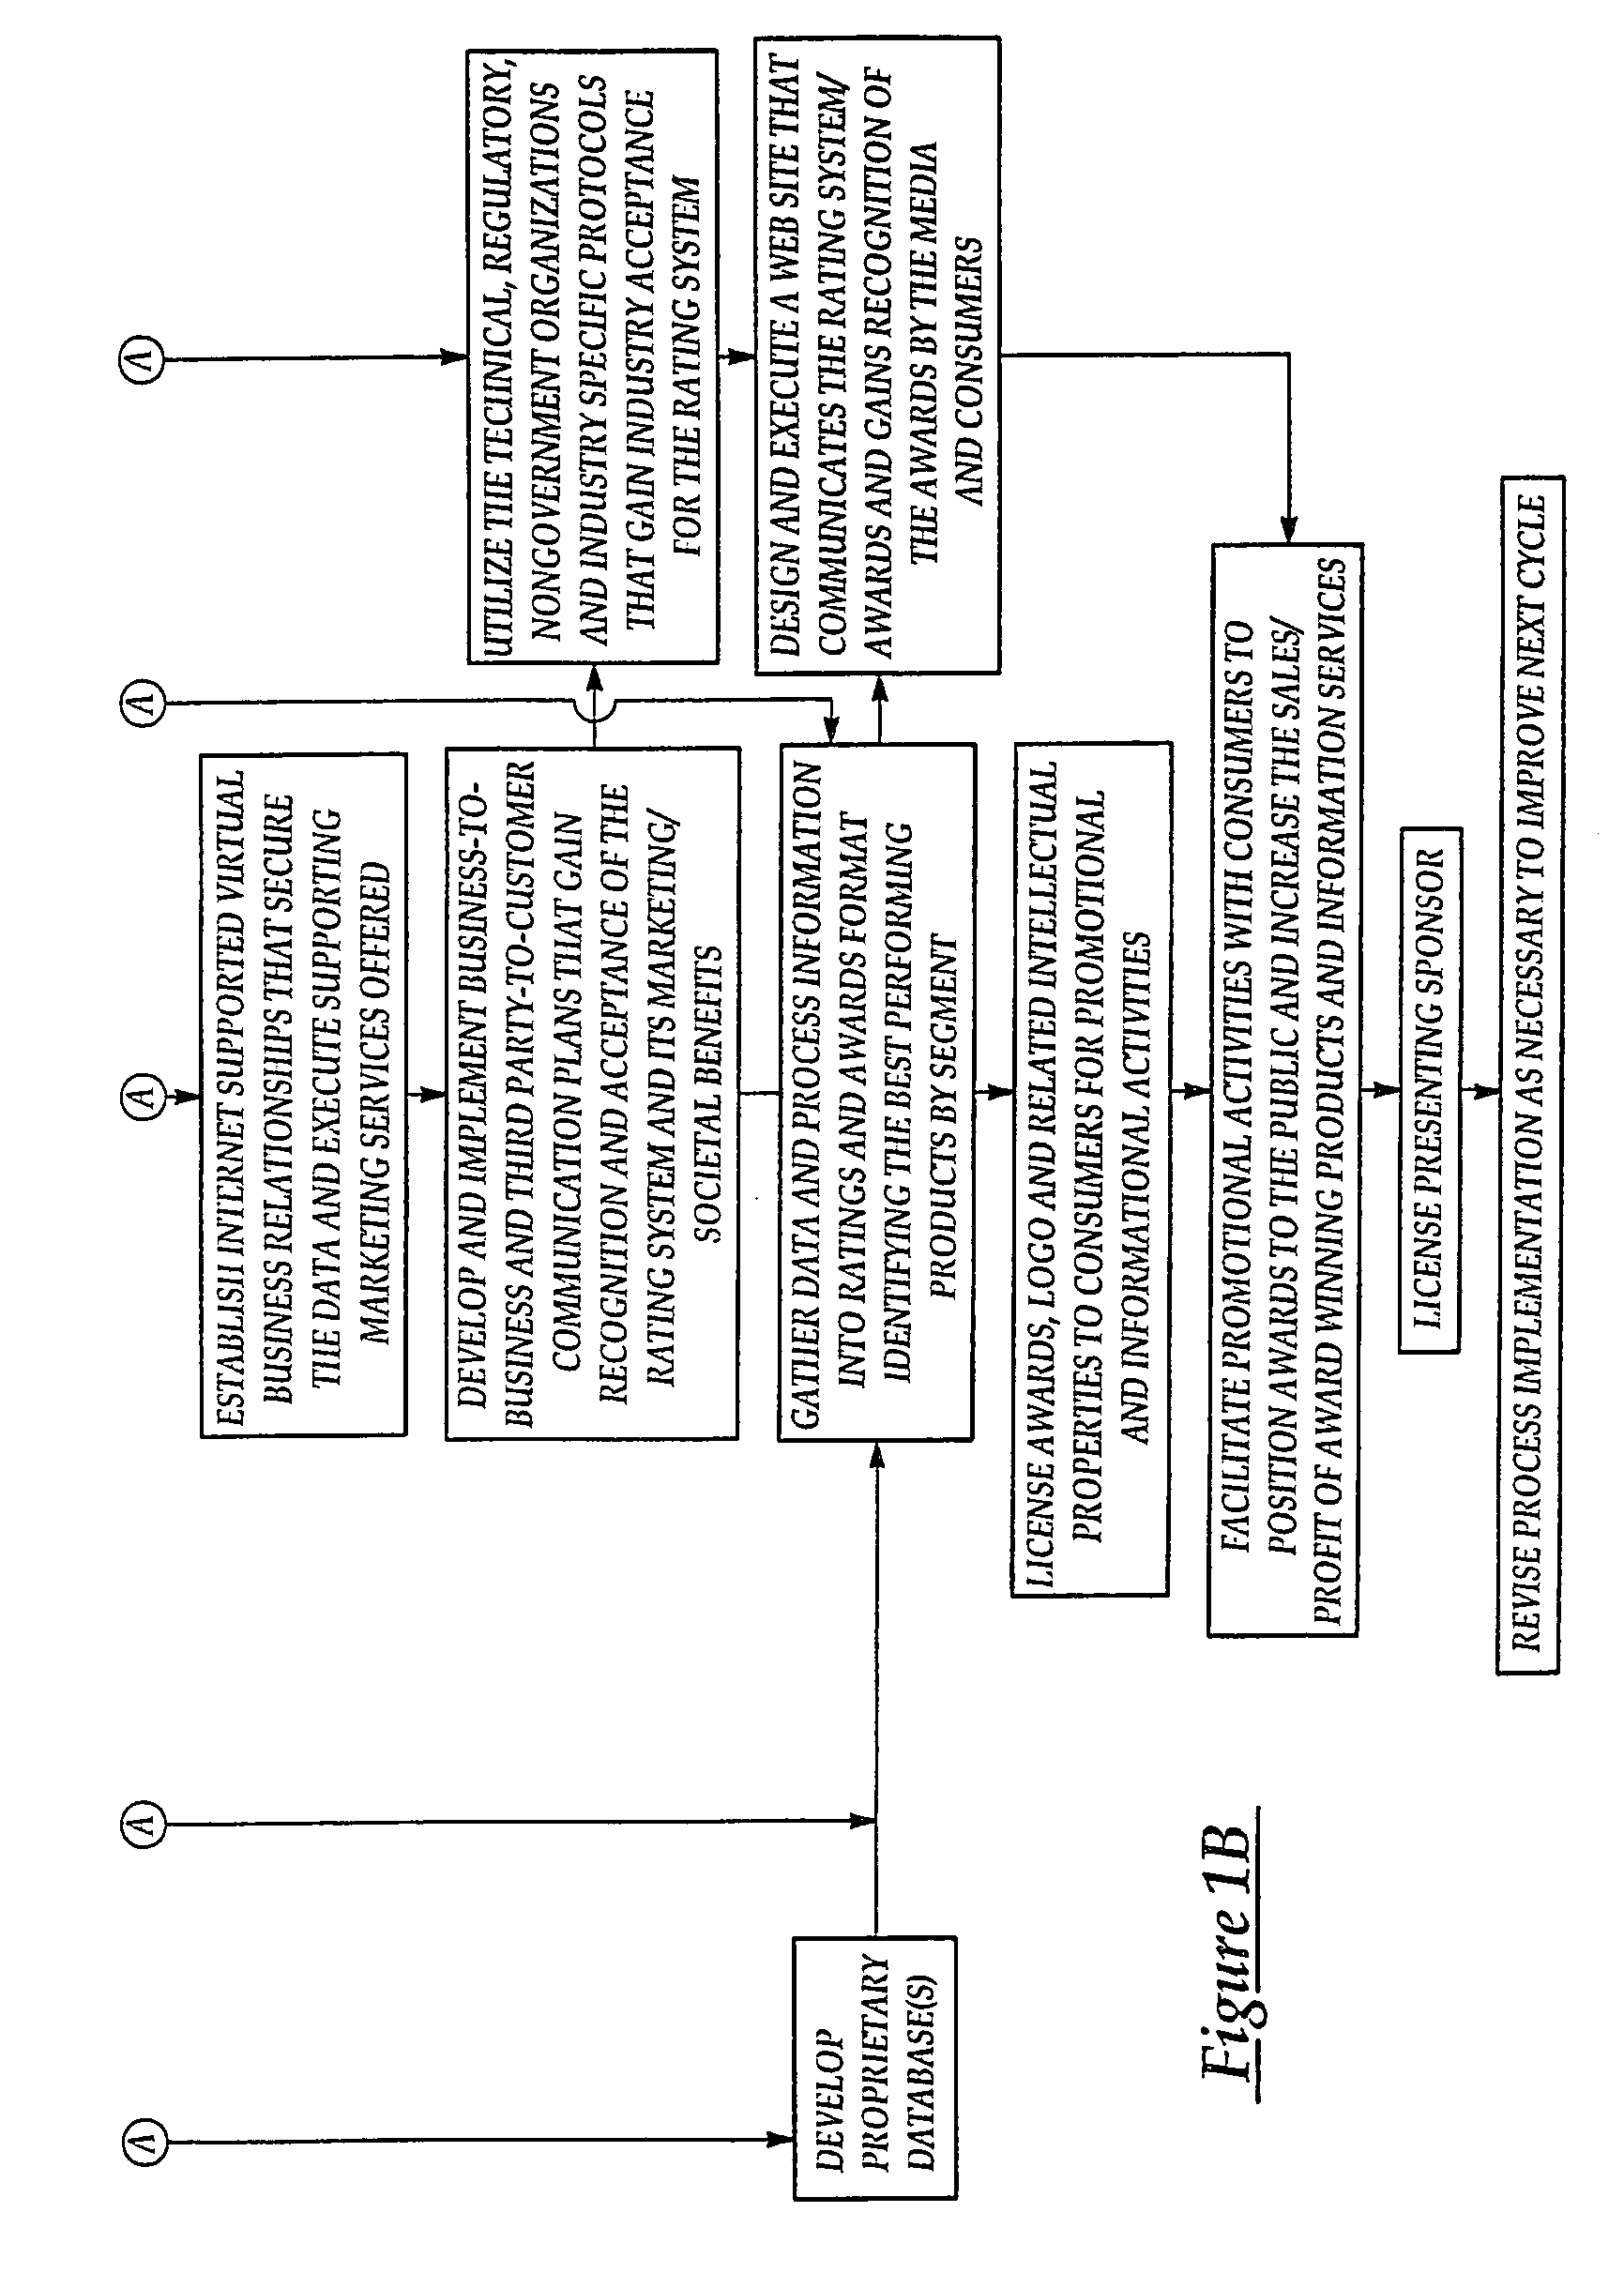 Communication system and method for sustaining the environment by using the internet